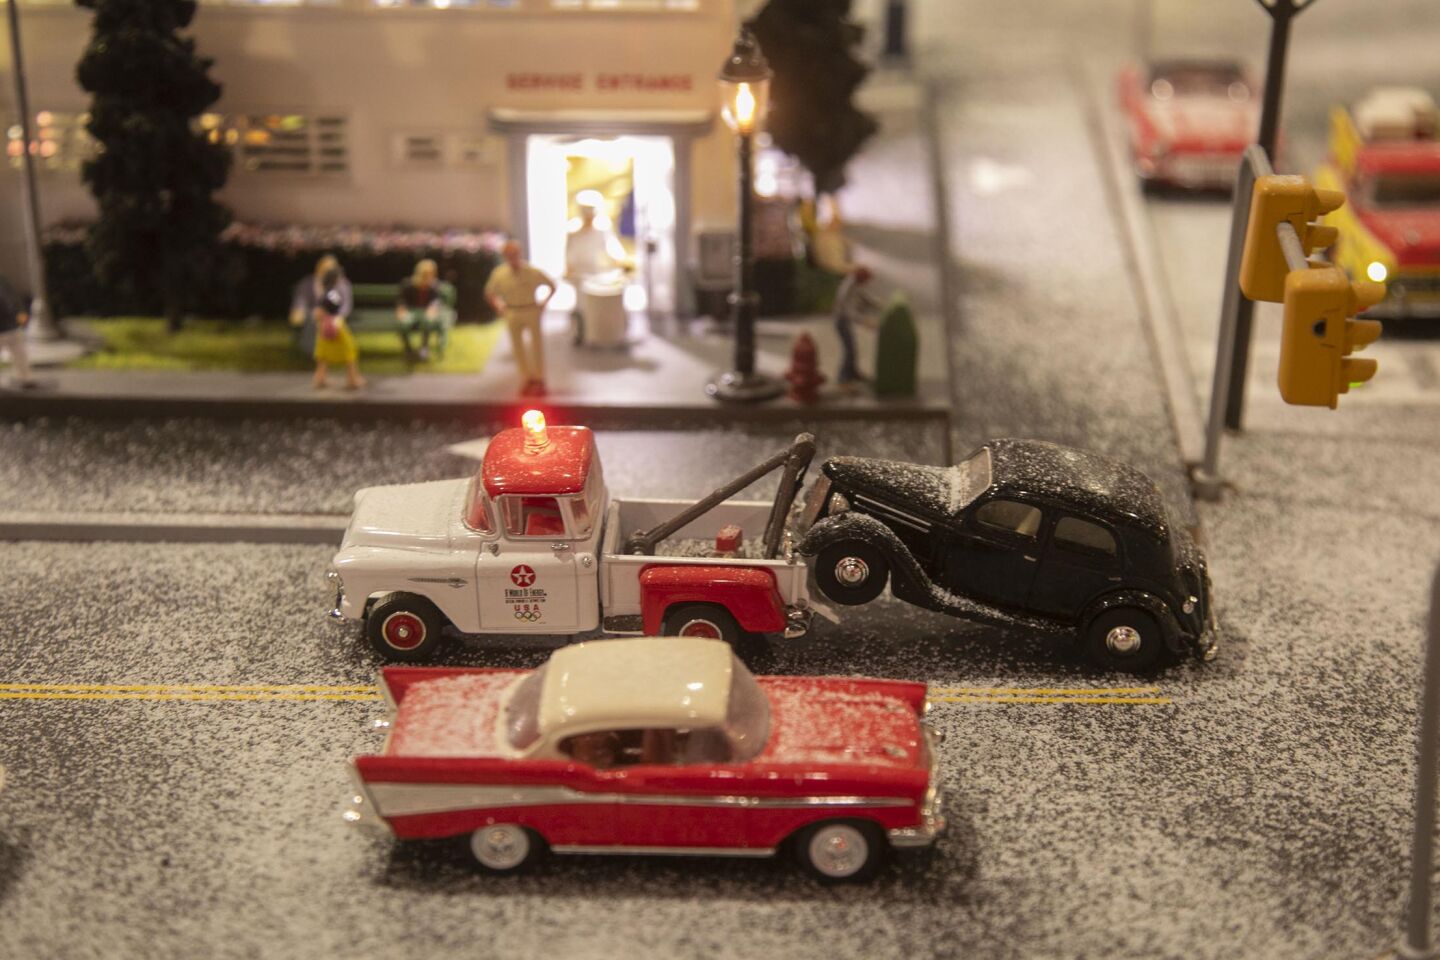 David Lizerbram and his wife Mana Monzavi took over the Old Town Model Railroad Depot, which was in danger of closing. The extensive train layout and its detailed and sometimes humorous dioramas was photographed on Friday, Dec. 13, 2019, at its Old Town, San Diego location. A 1950s-era tow truck towing '40s car.